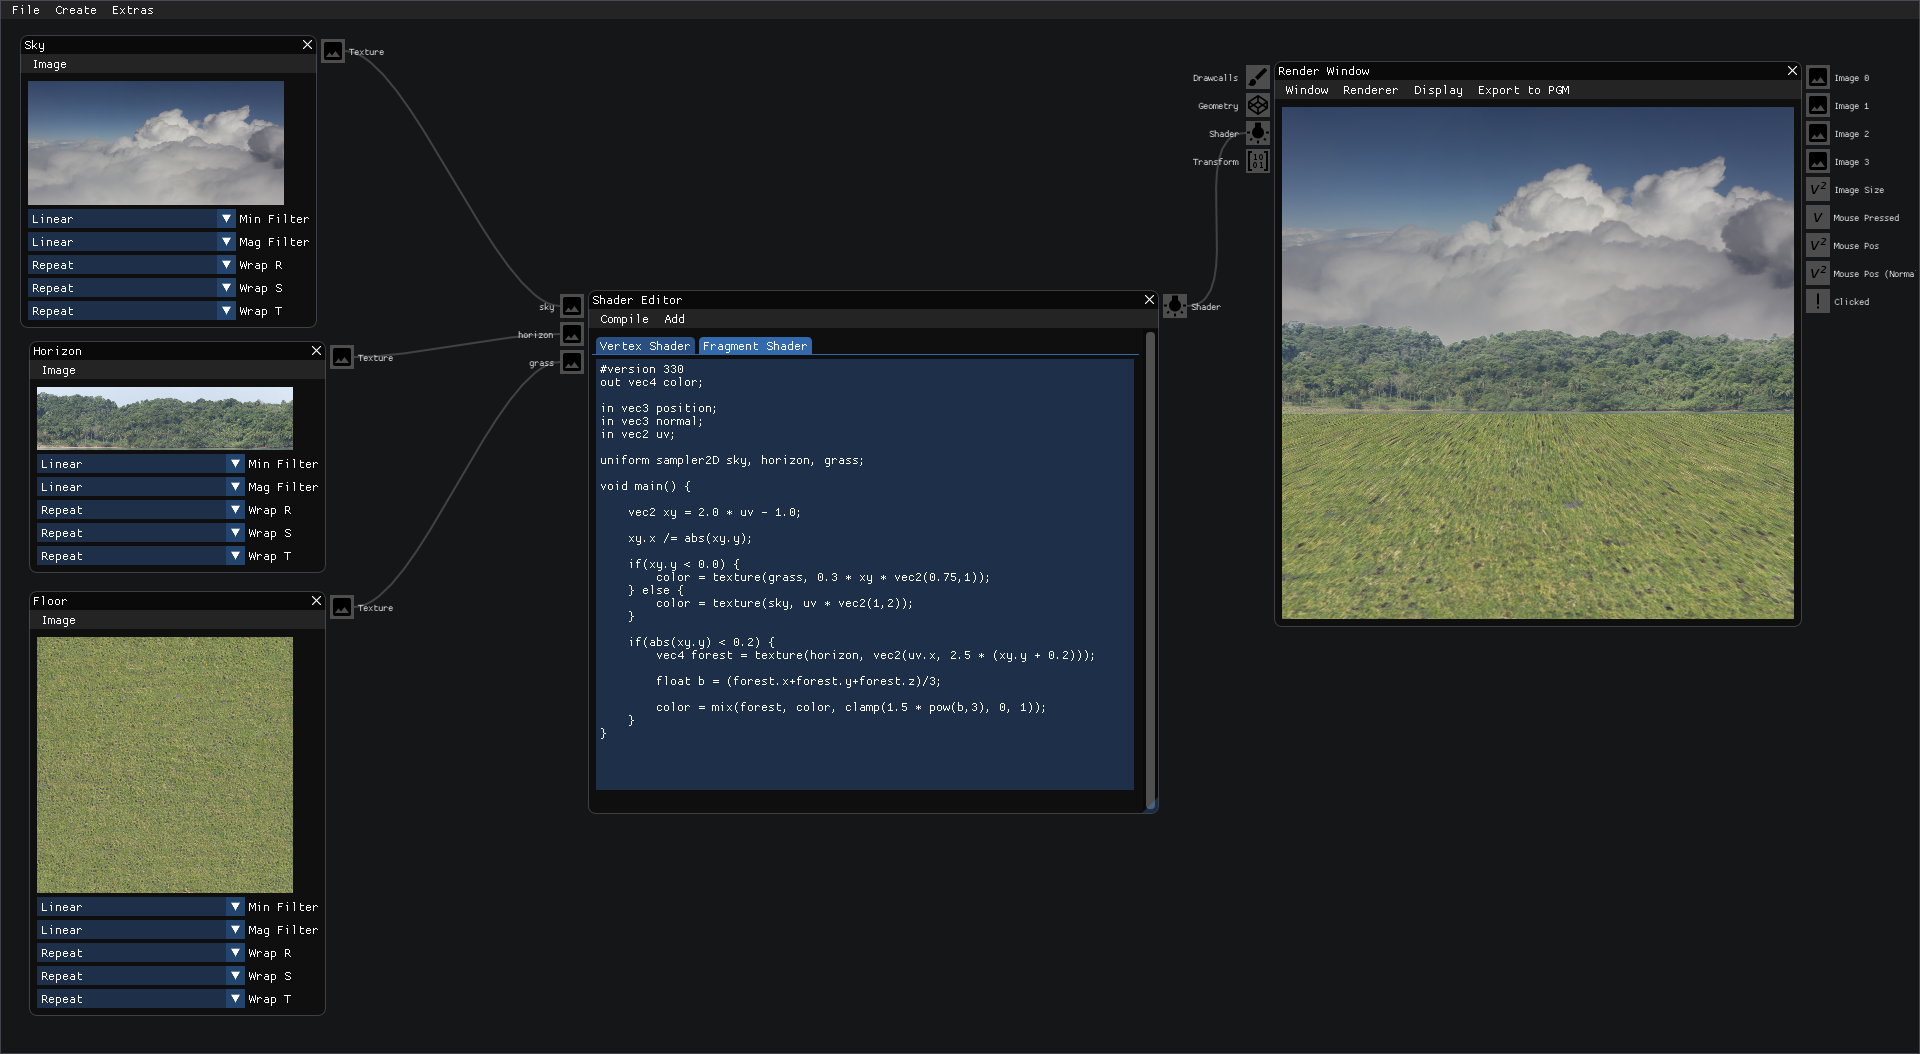 CG Workbench used to compose three images into a single landscape